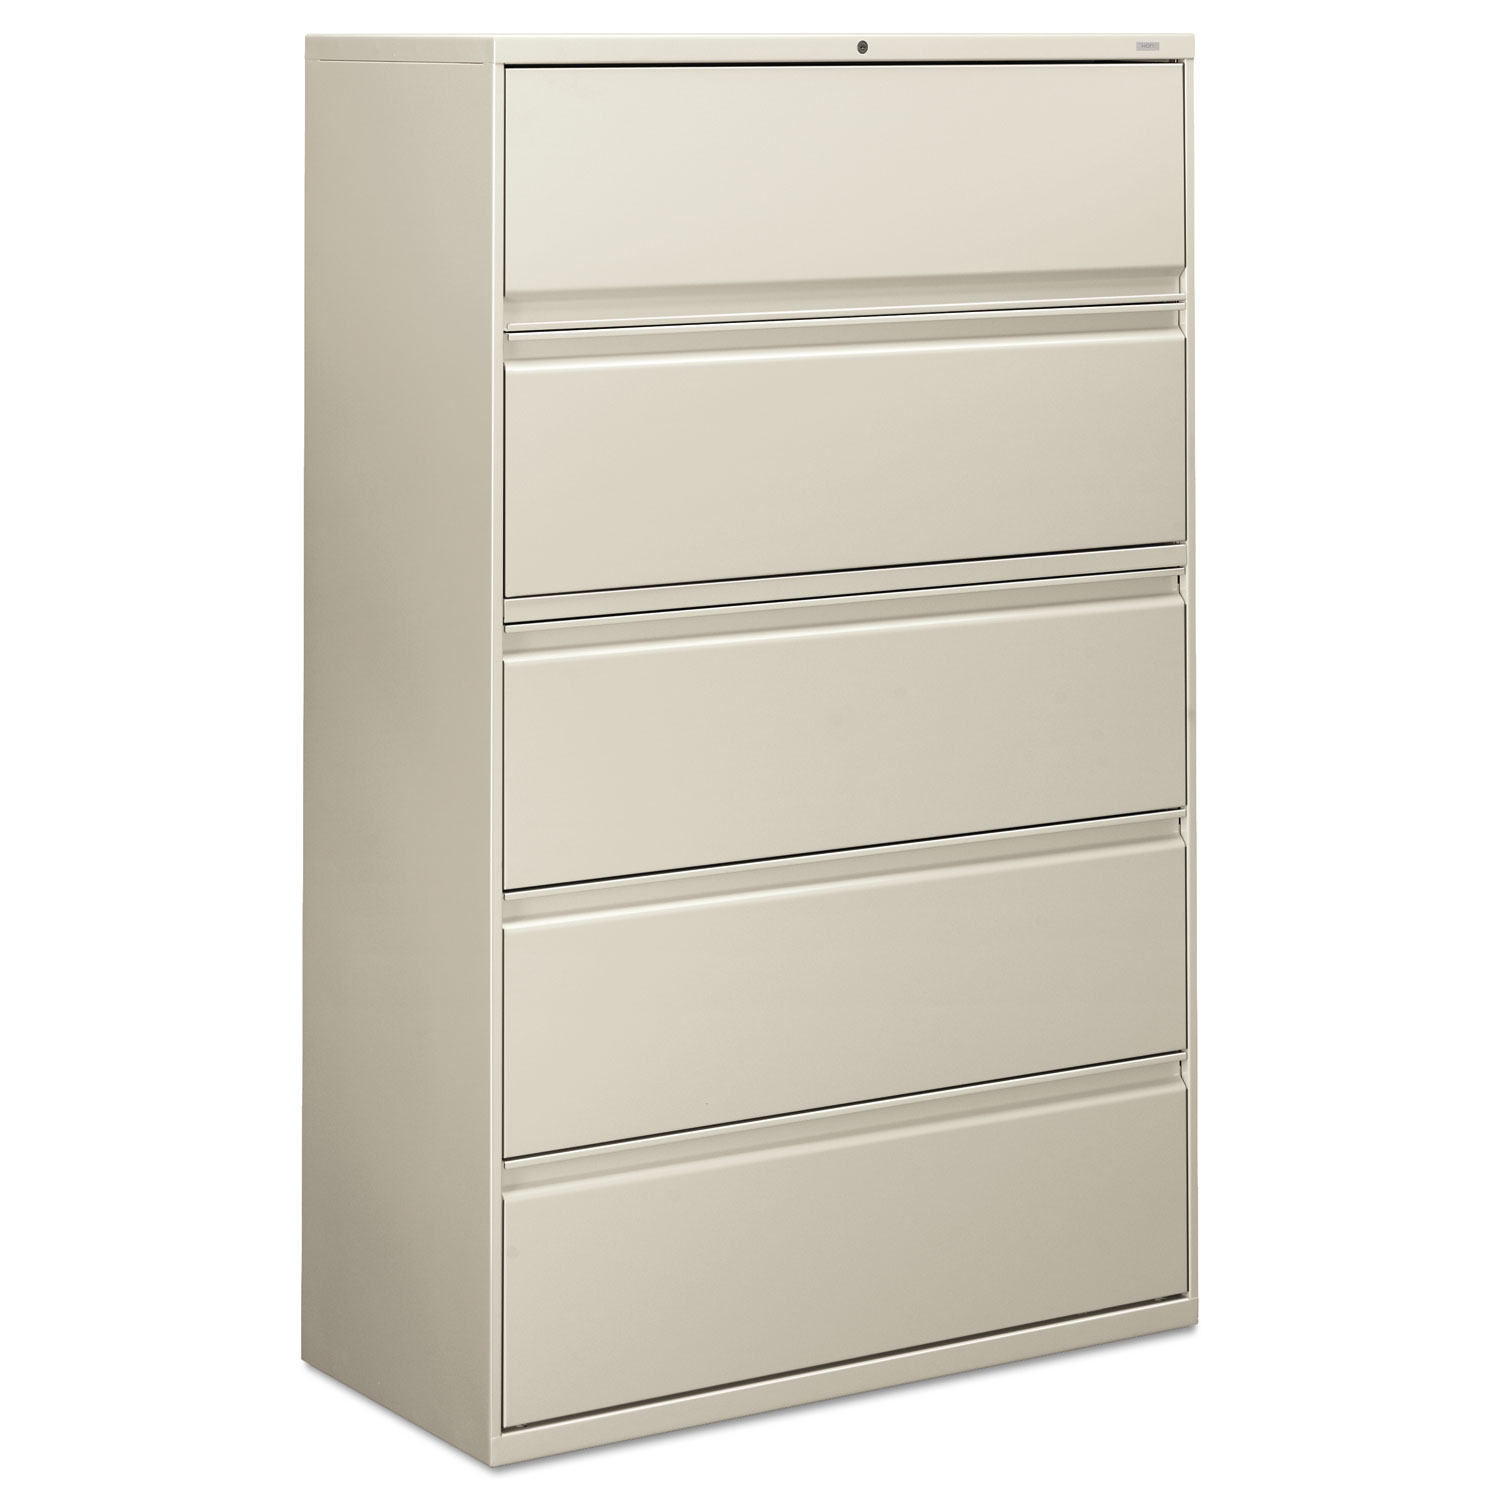 801 Series Five-Drawer Lateral File, Roll-Out/Posting Shelves,42w x 67h, Lt Gray